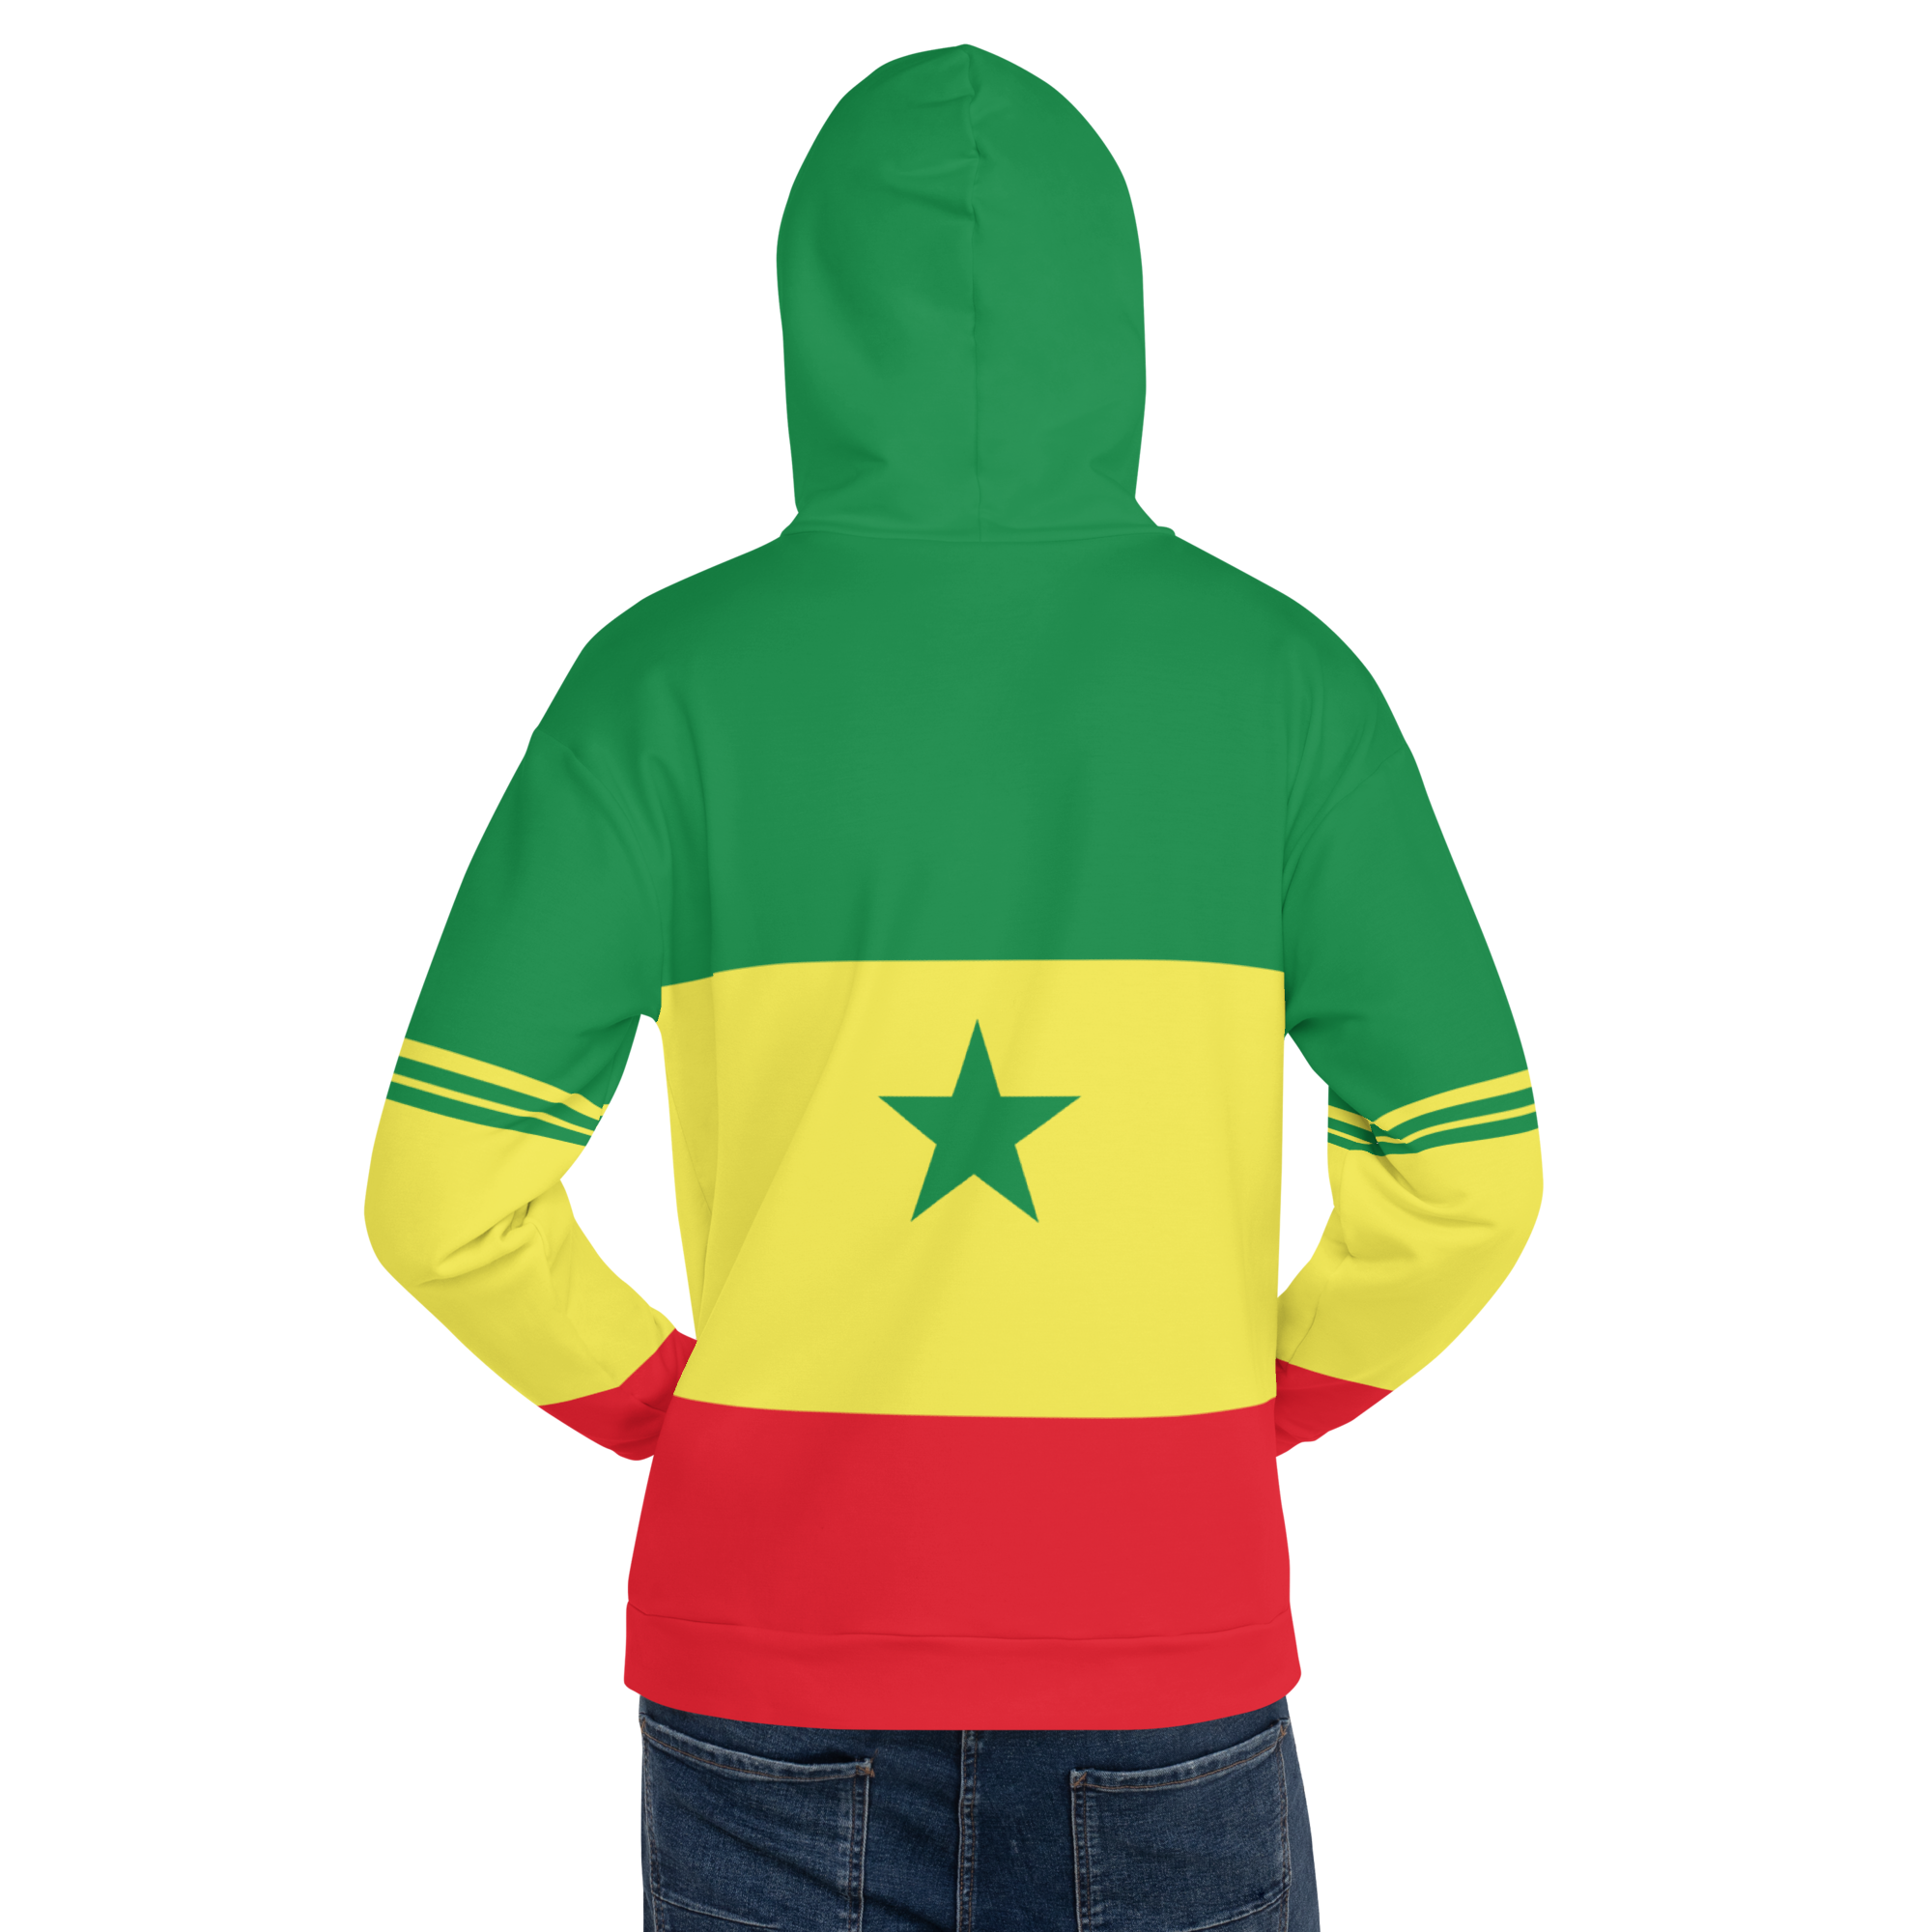 My colorful Senegal flag inspired unisex oversized volleyball team hoodies by Volleybragswag are now sold on ETSY!